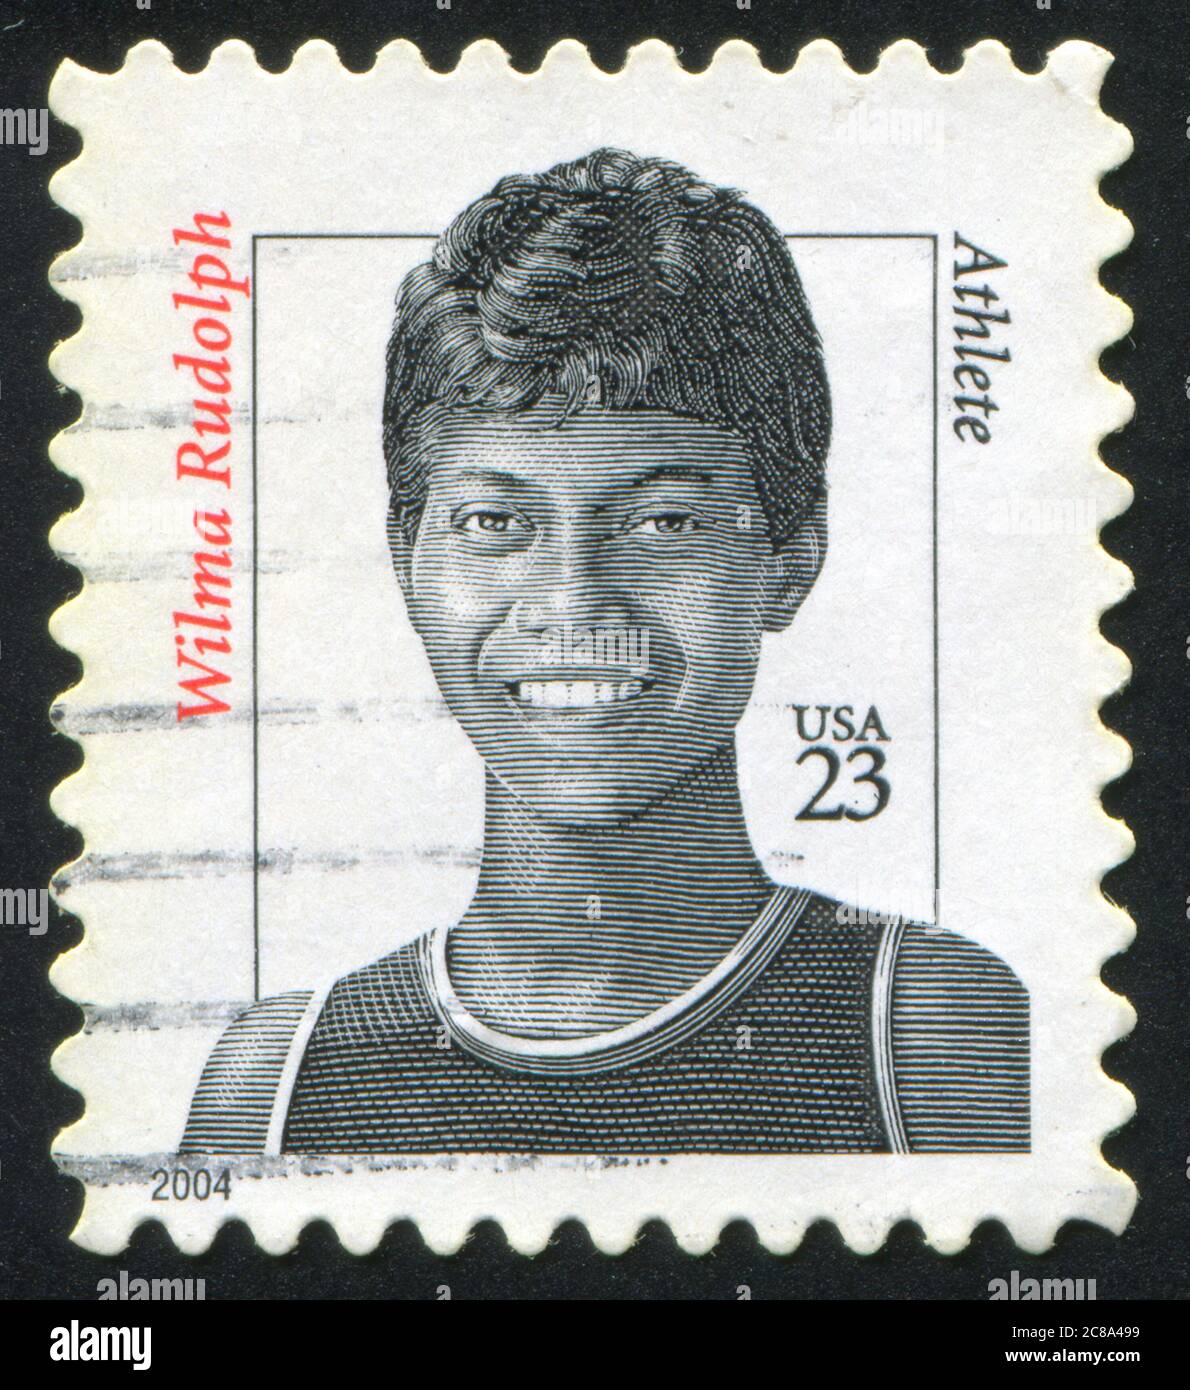 UNITED STATES - CIRCA 2004: stamp printed by United states, shows Wilma Rudolph, Athlete, circa 2004 Stock Photo